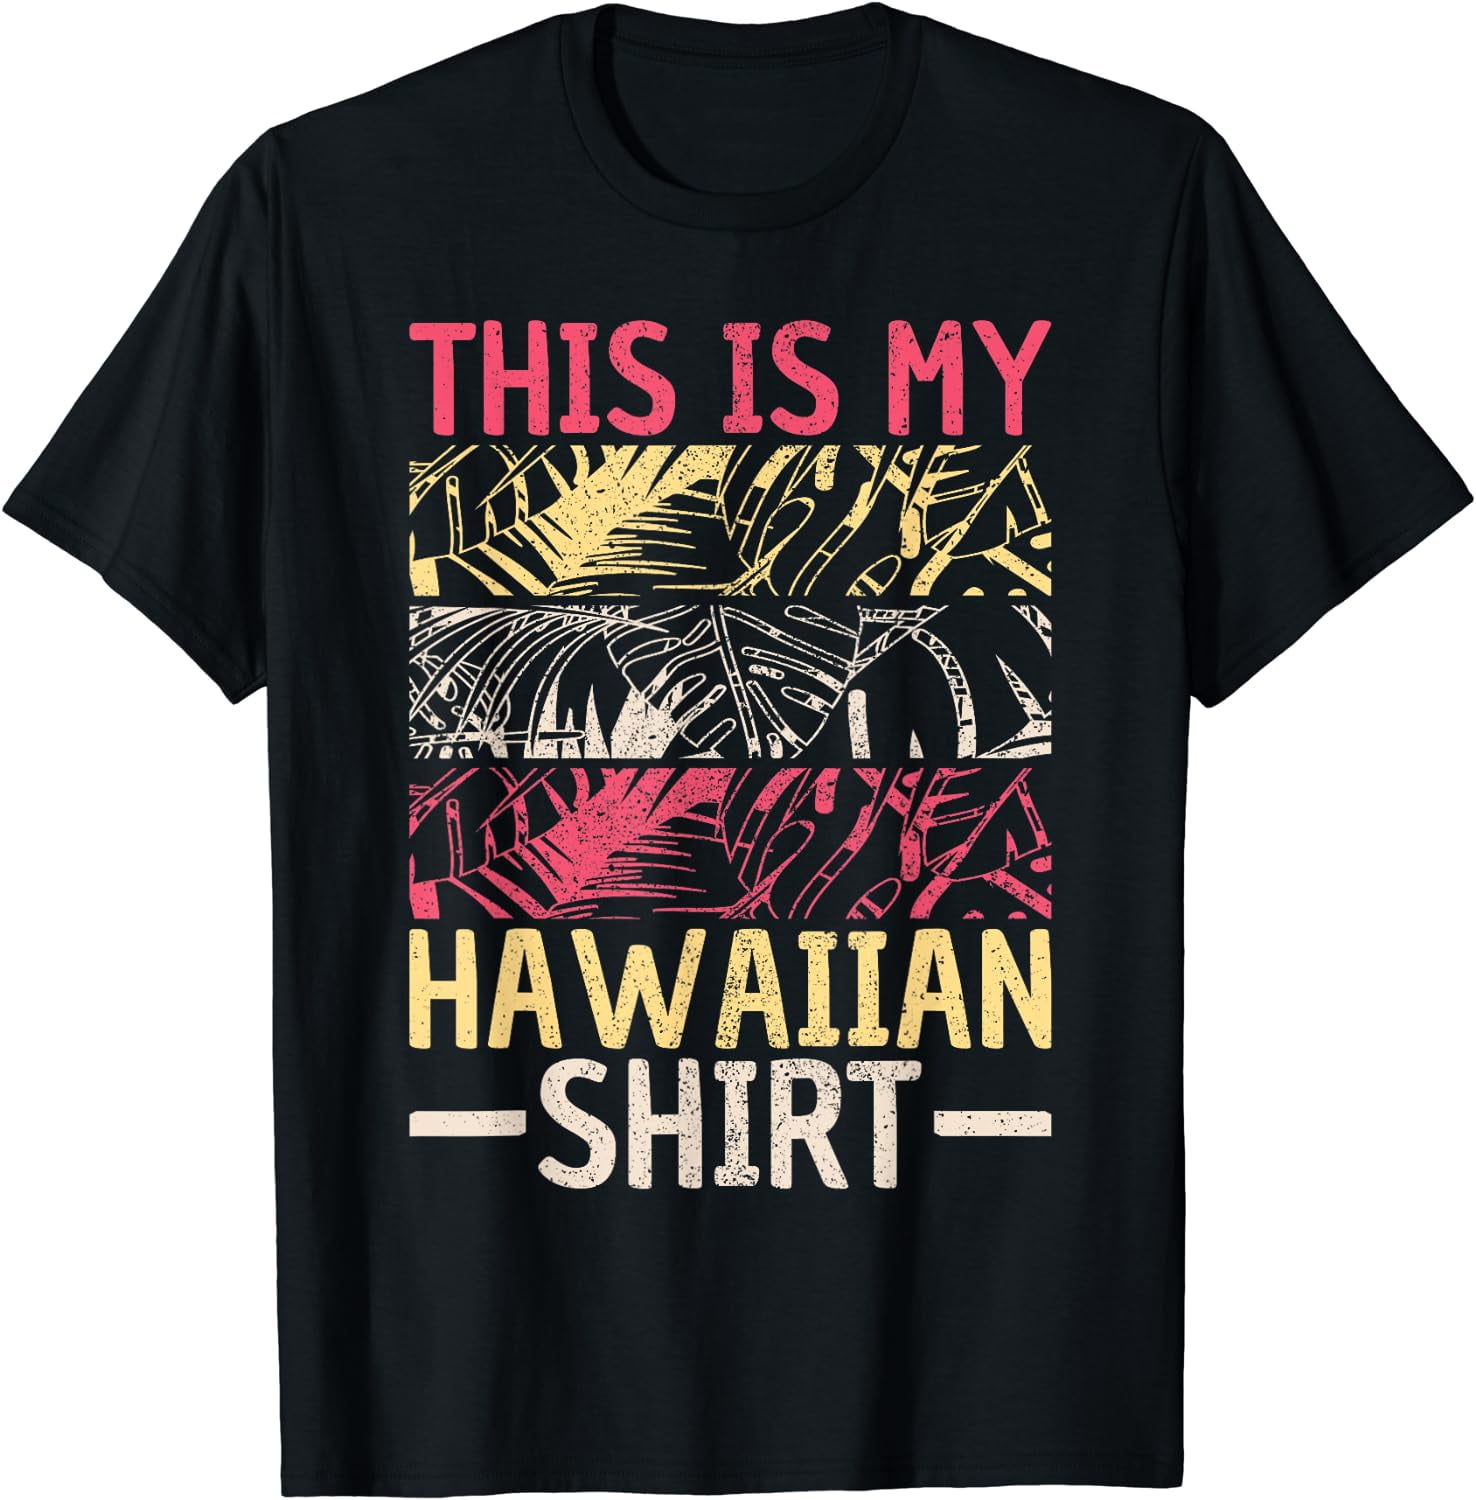 This Is My Hawaiian Shirt Tropical Outfit Luau Party Costume T-Shirt ...